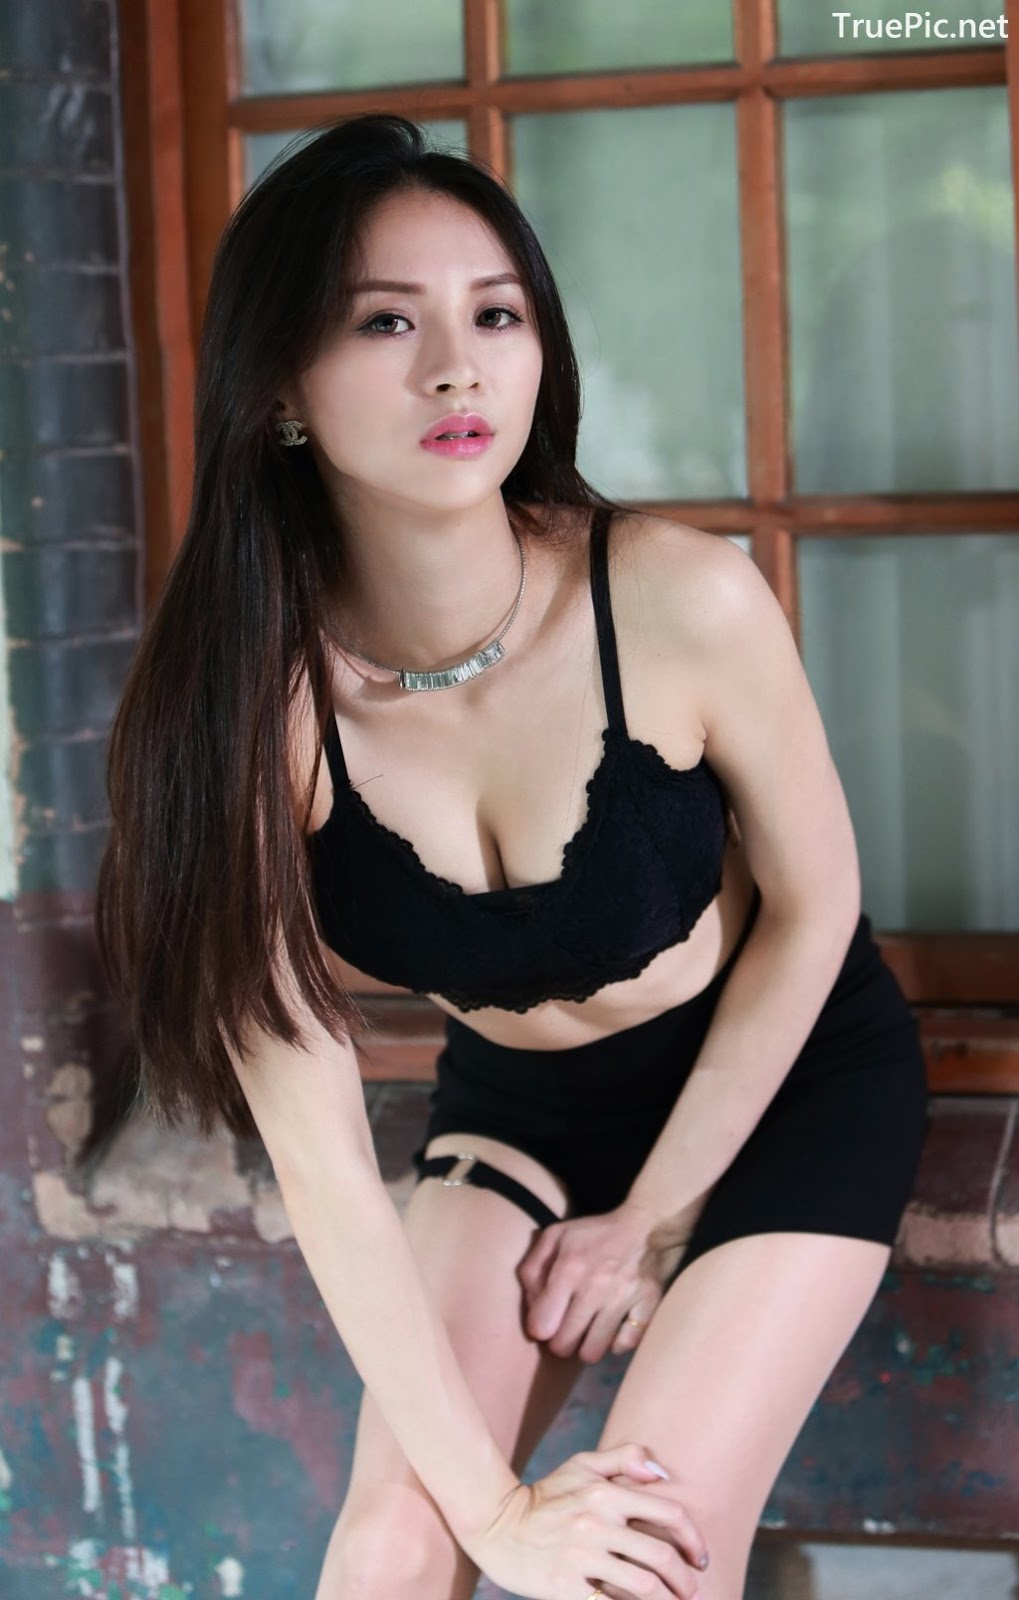 Image-Taiwanese-Beautiful-Long-Legs-Girl-雪岑Lola-Black-Sexy-Short-Pants-and-Crop-Top-Outfit-TruePic.net- Picture-32